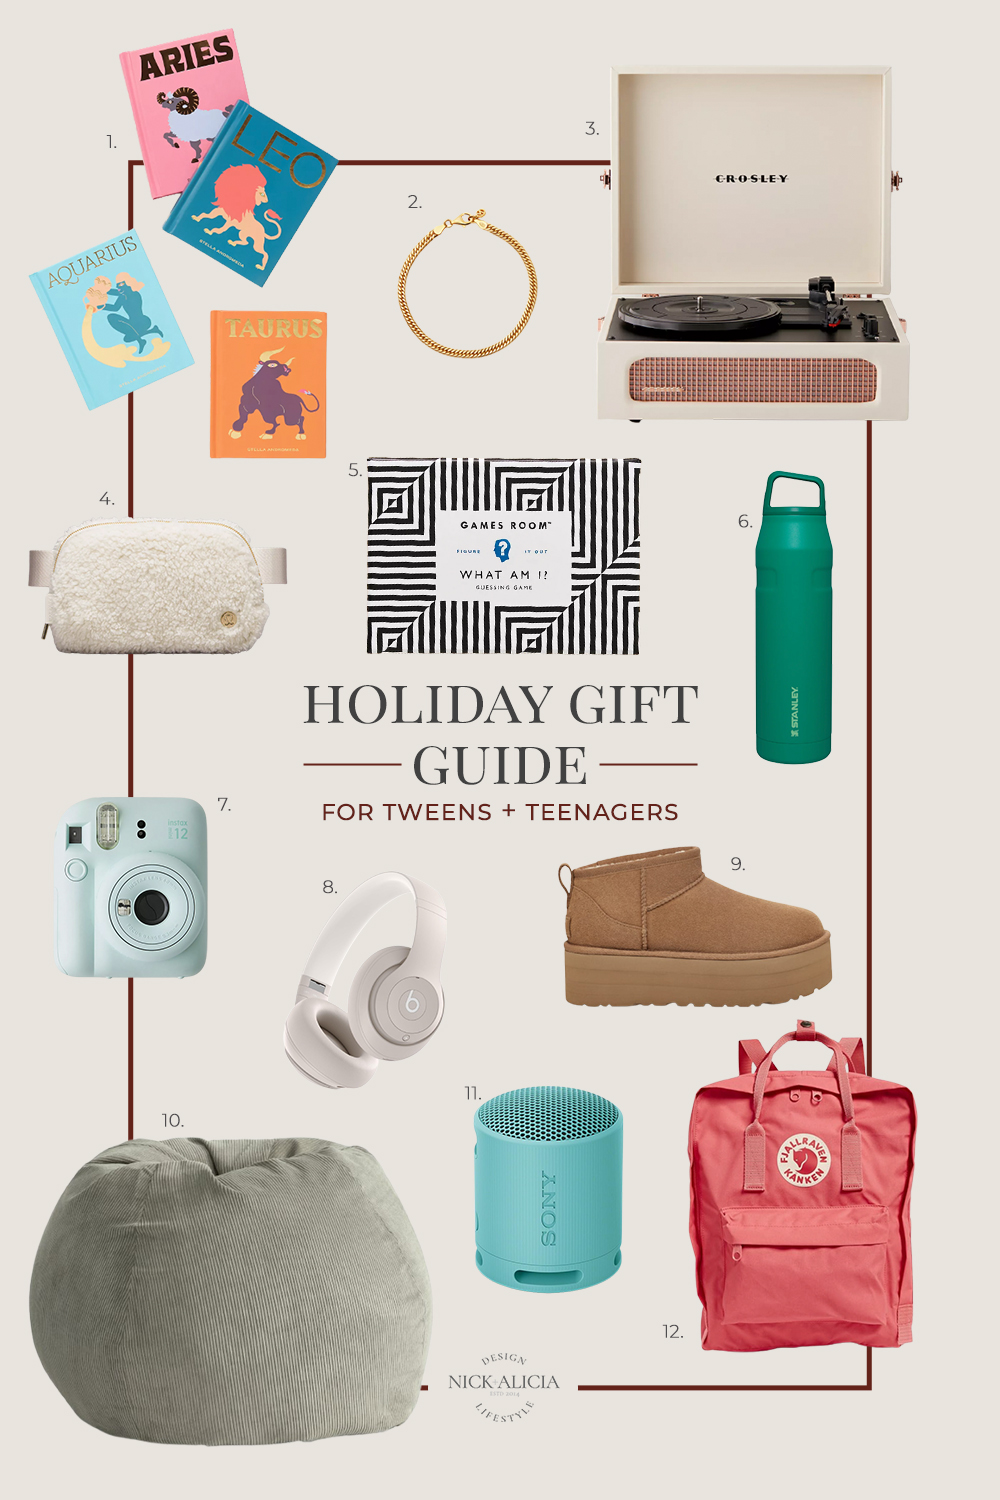 Holiday Gift Guide For A Young Girl » The Tattered Pew